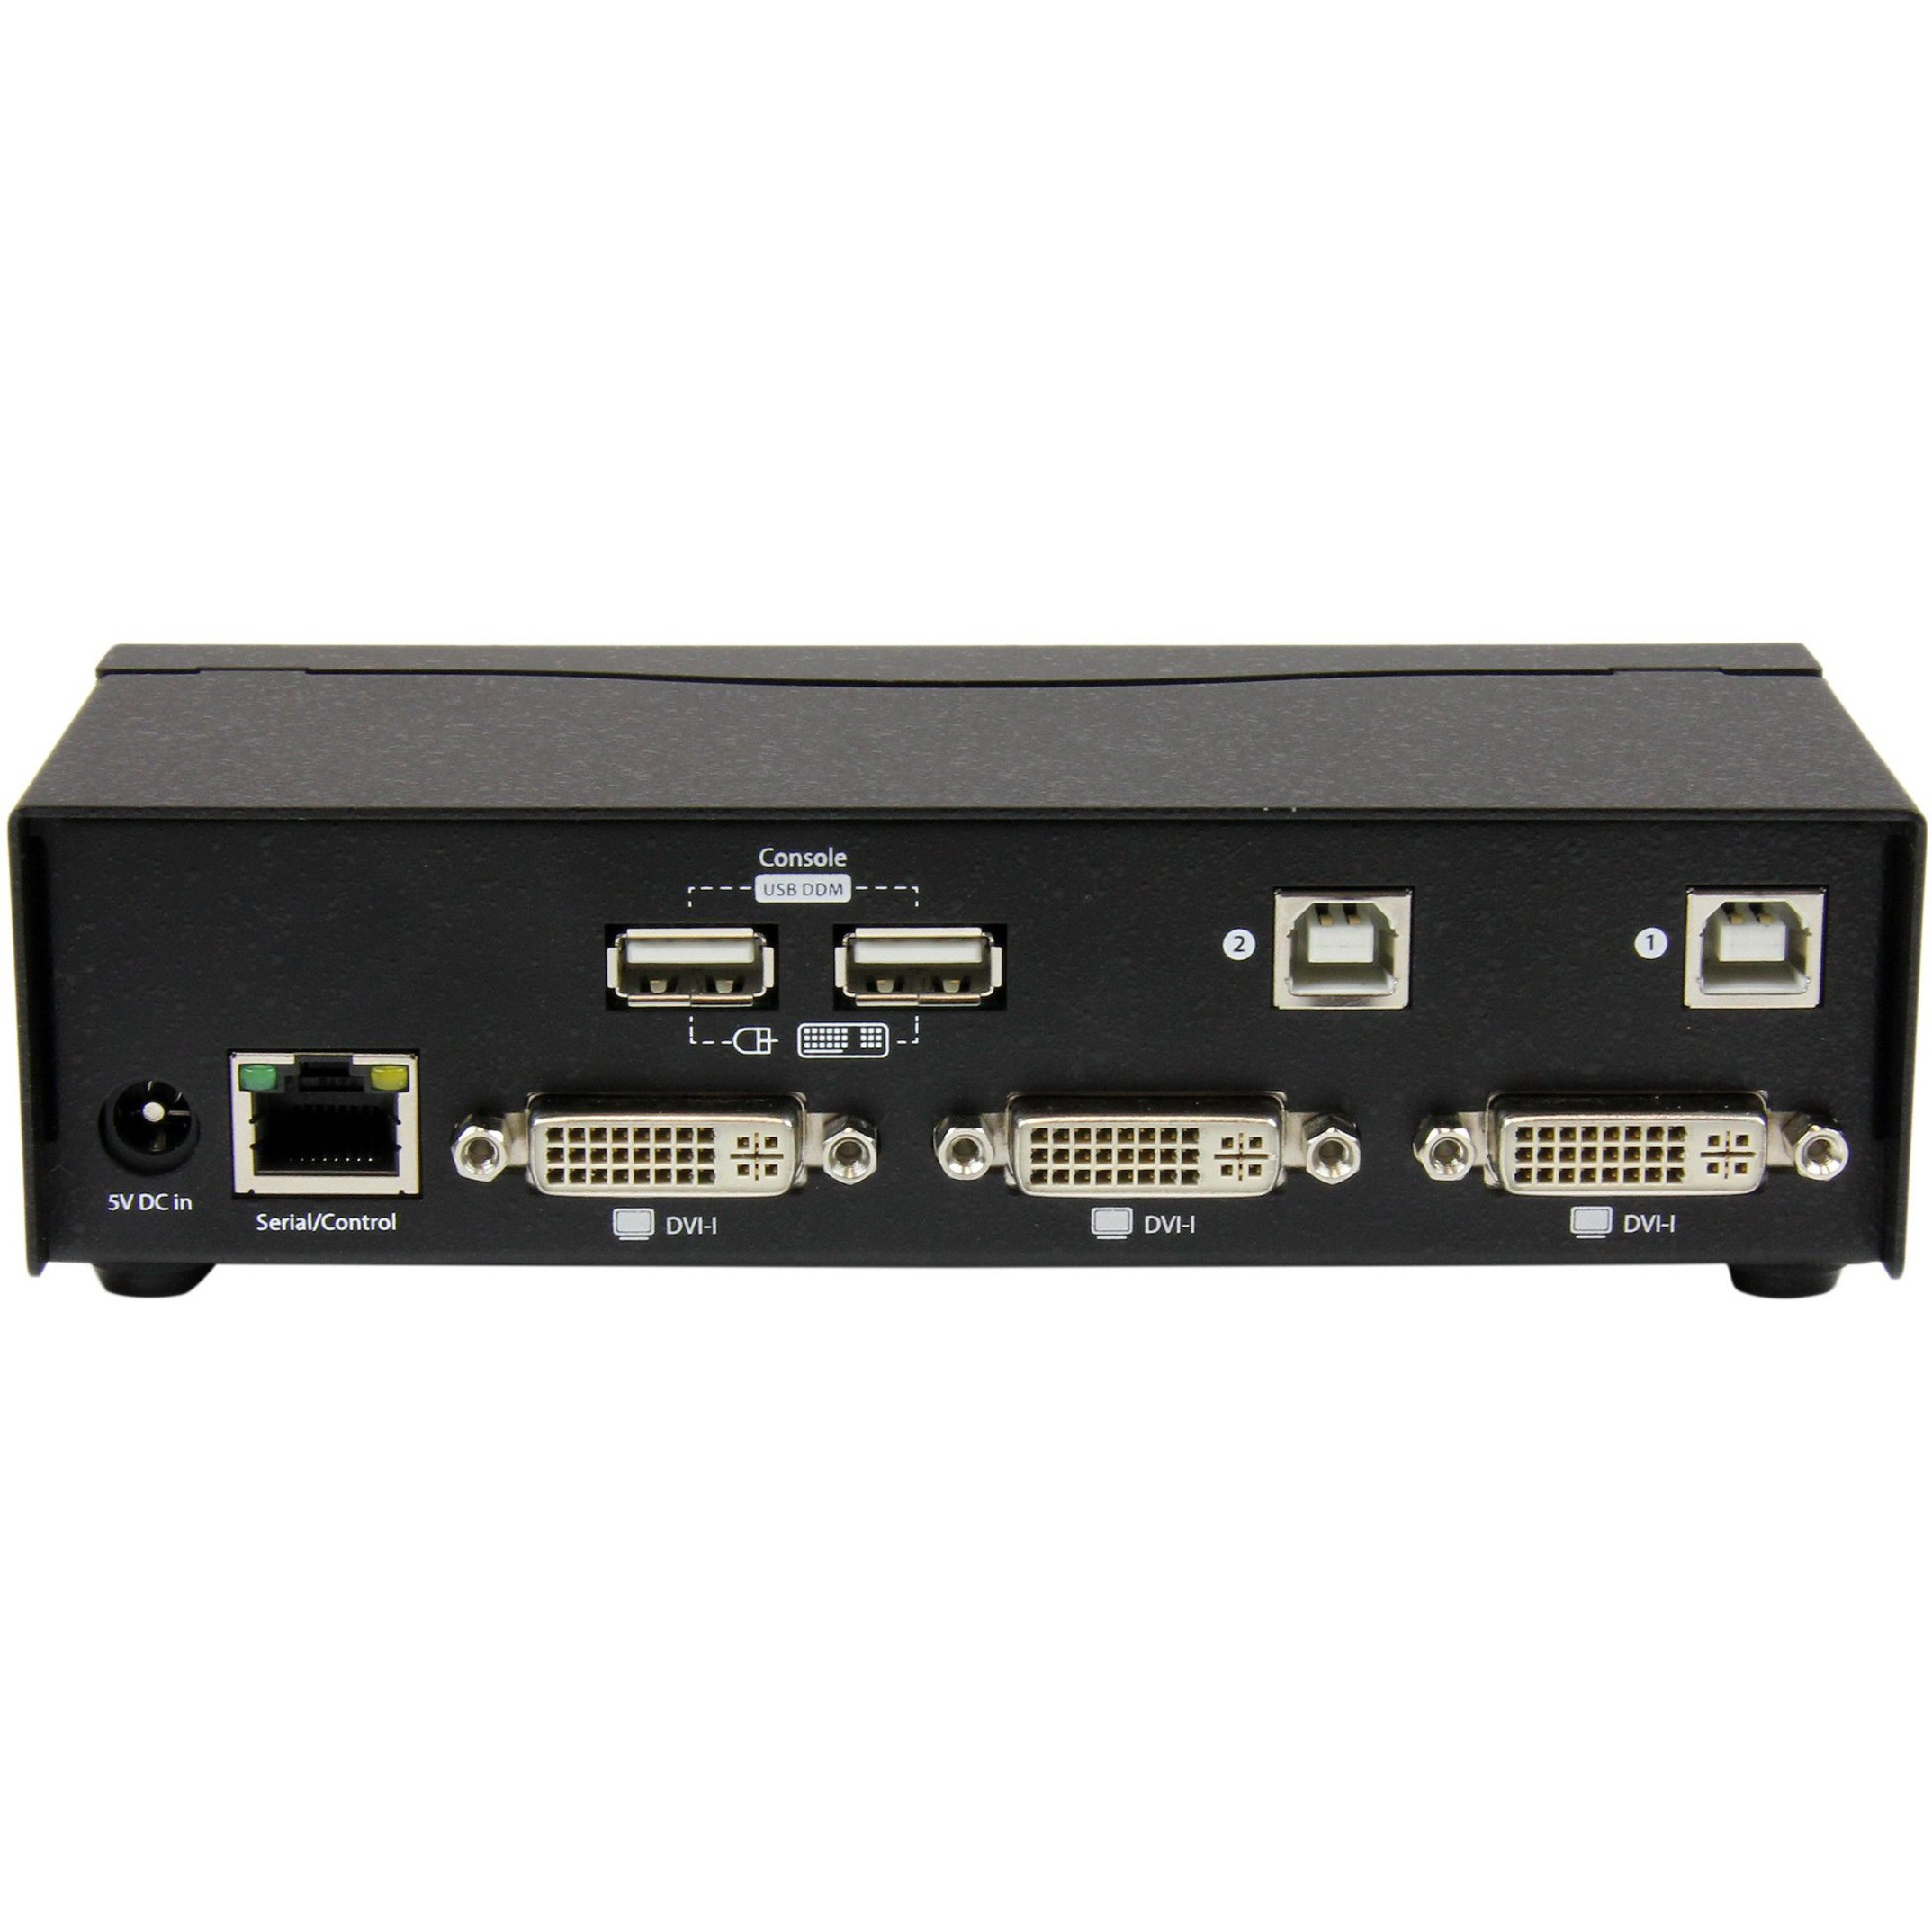 Startech .com 2 Port USB DVI KVM Switch with DDM Fast Switching Technology and CablesControl 2 DVI, USB-equipped PCs with a single periph… SV231DVIUDDM